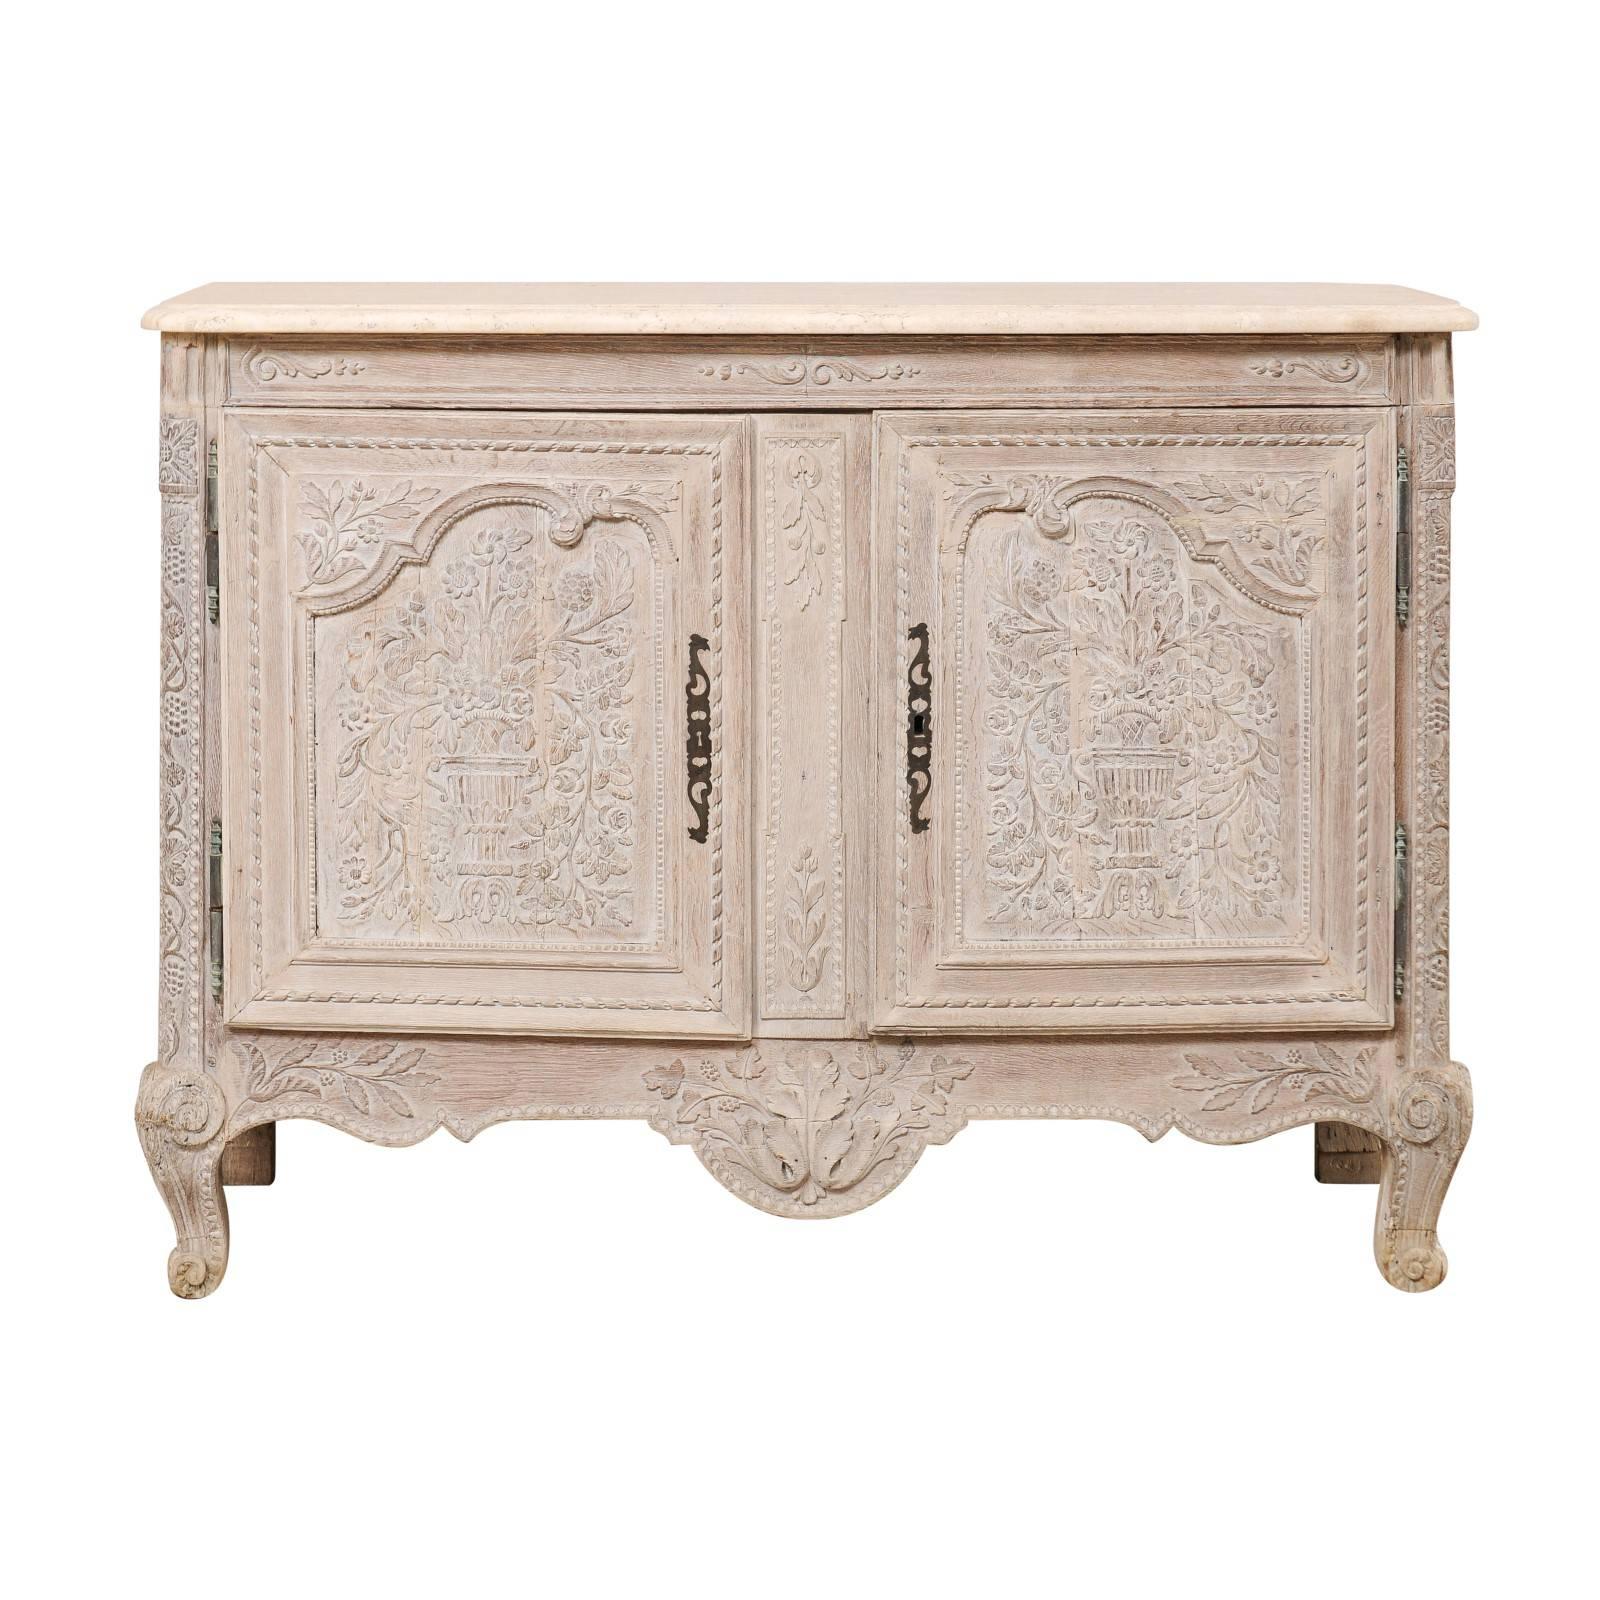 French Highly Detailed Carved Wood Cabinet with Marble Top in Soft Cream Color